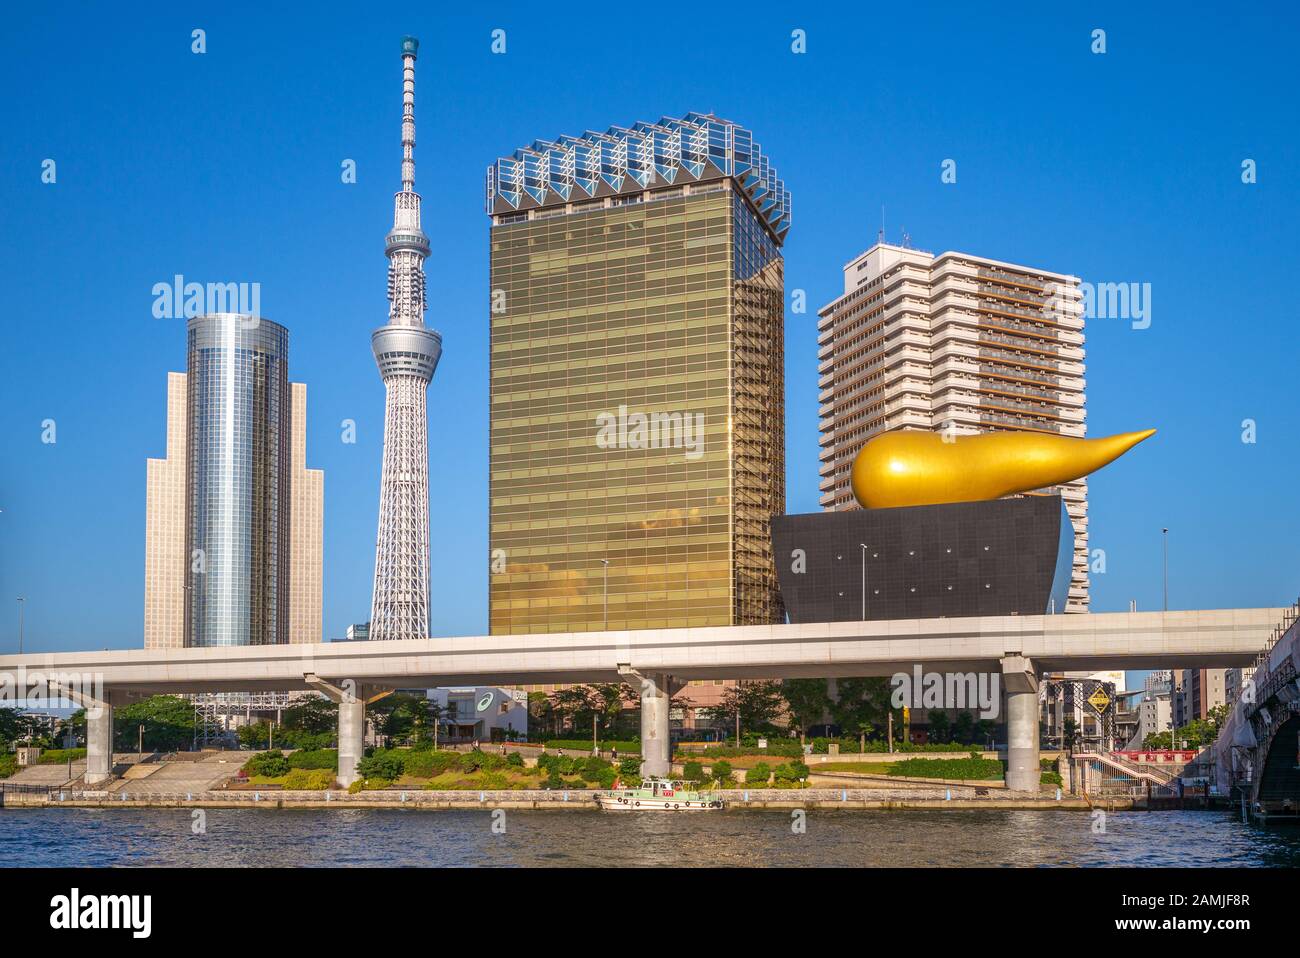 Tokyo, Japan - June 13, 2019: Asahi Beer Hall, designed by French designer Philippe Starck and was completed in 1989, on bank of Sumida River with tok Stock Photo